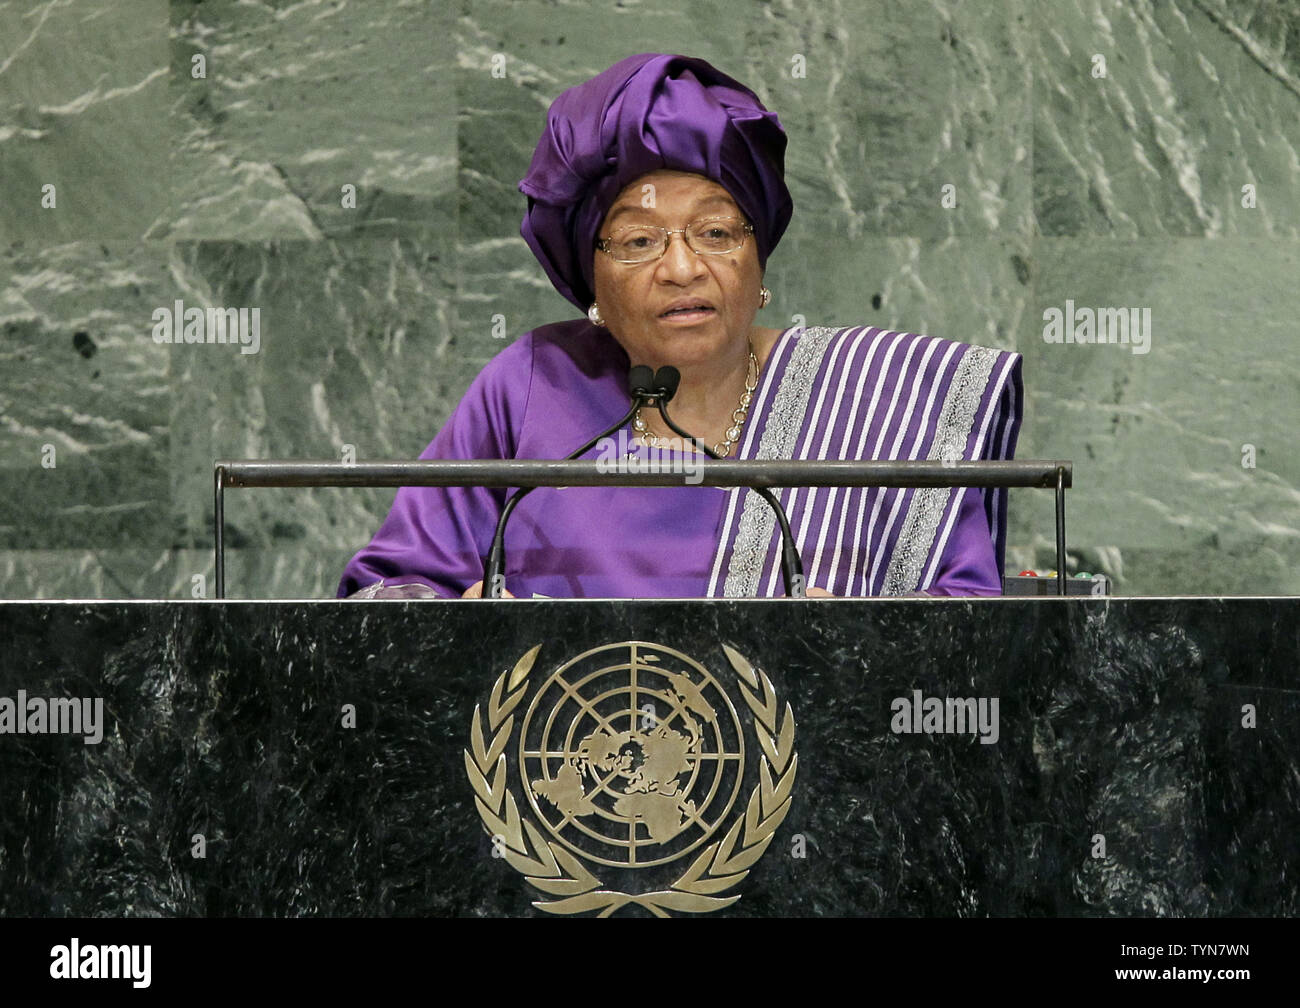 Her Excellency Ellen Johnson-Sirleaf, President of the Republic of Liberia addresses the United Nations at the 67th United Nations General Assembly in the UN building in New York City on September 26,